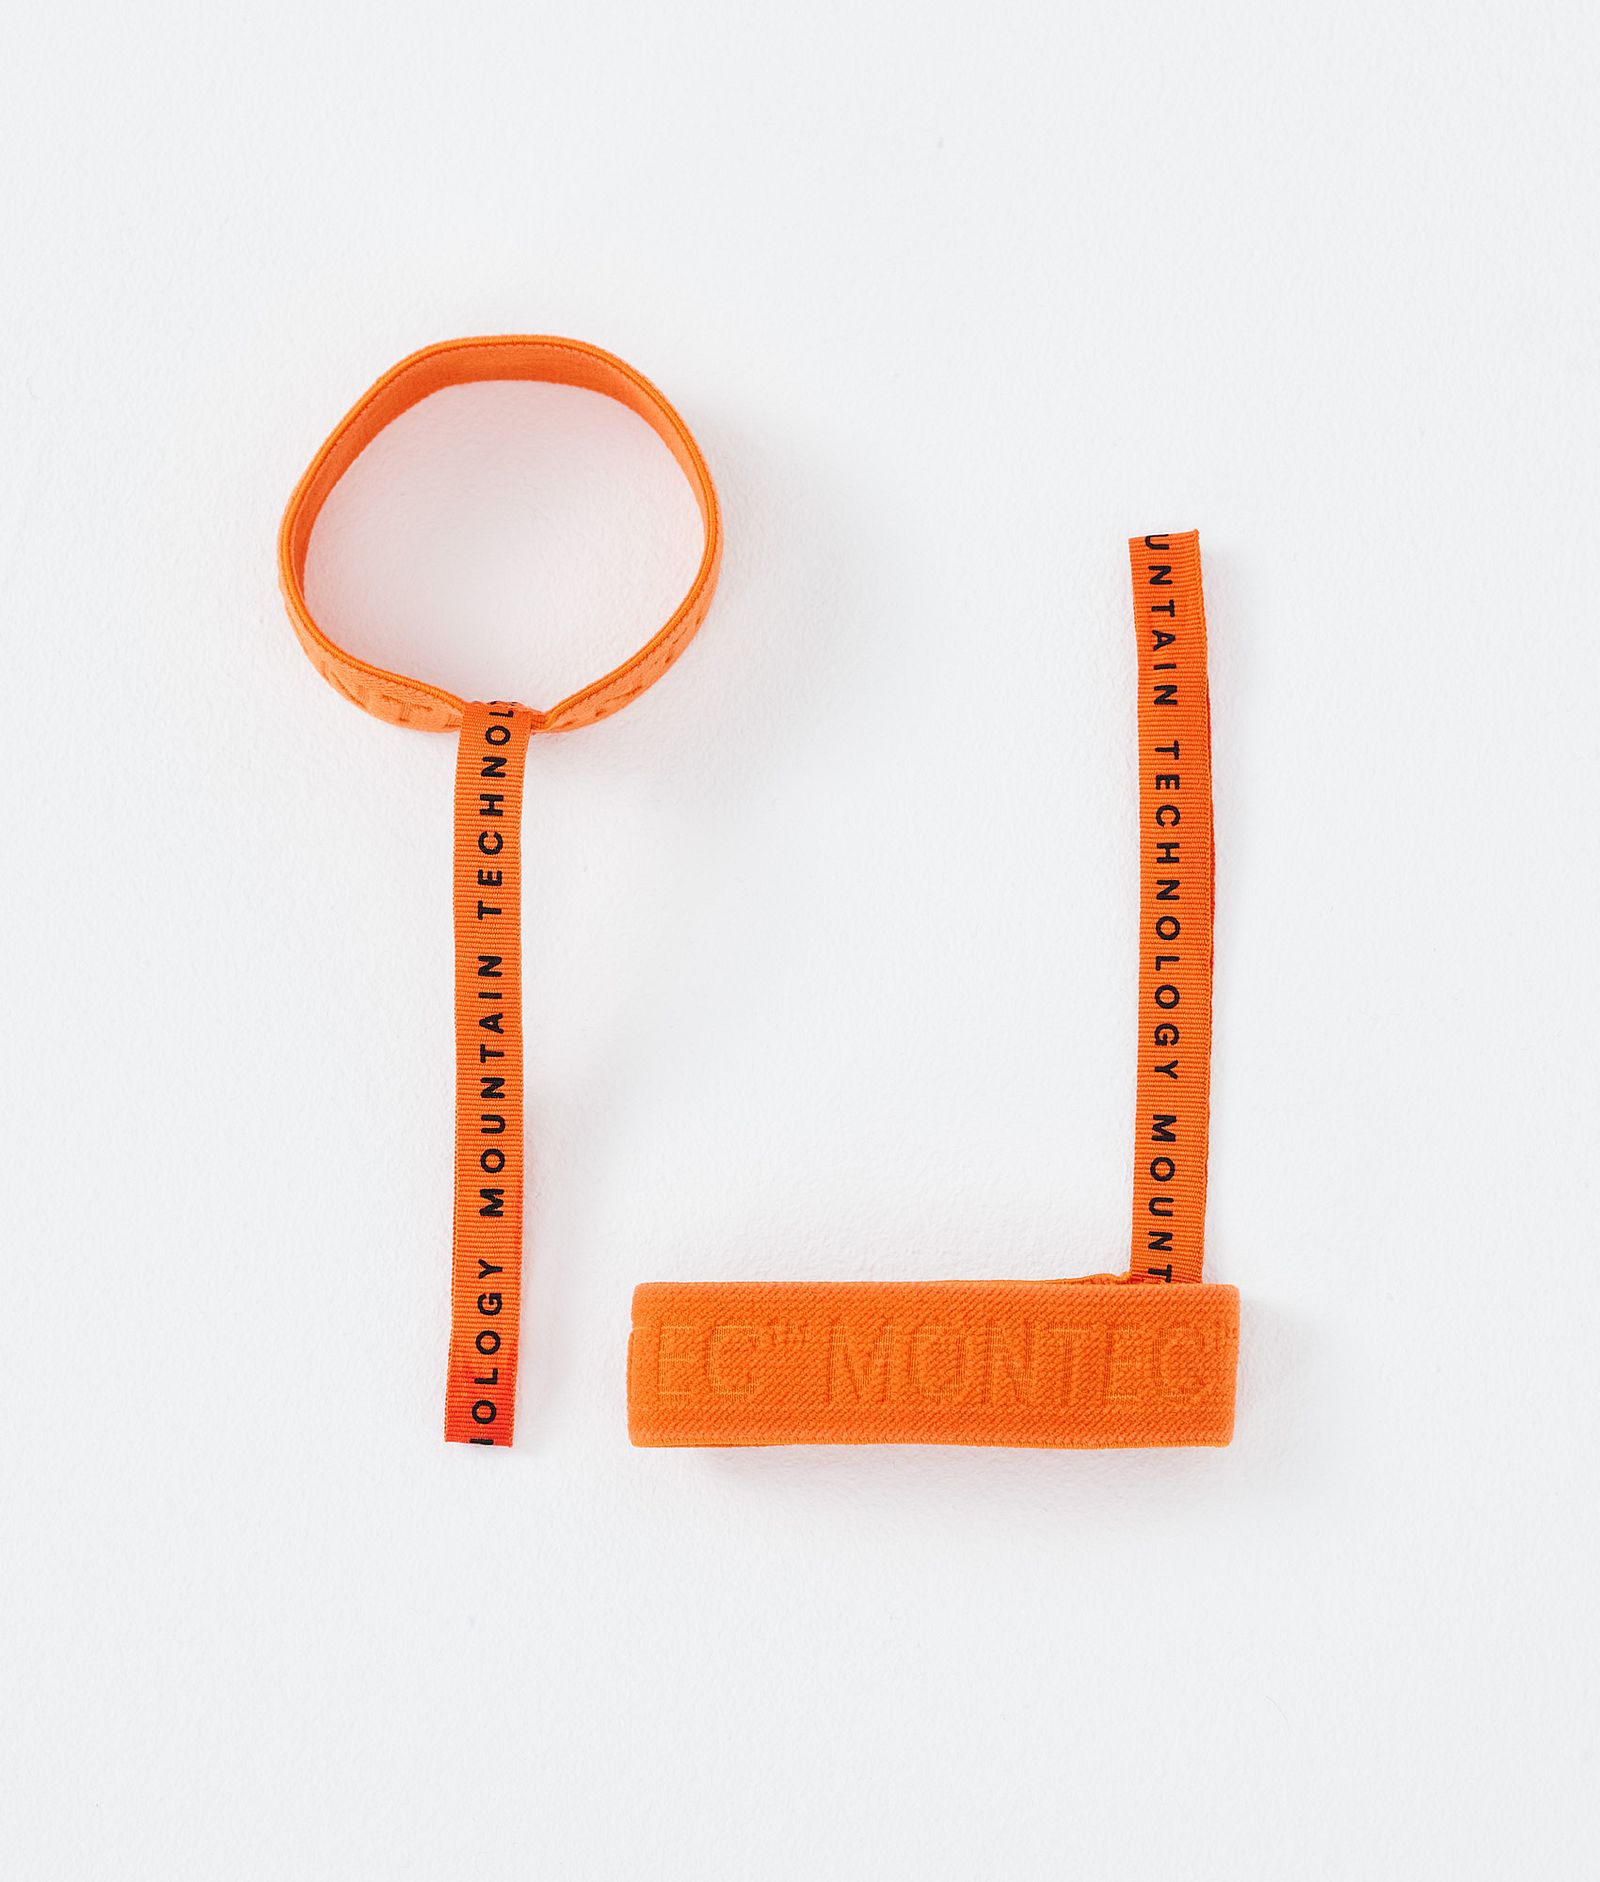 Wrist Band Replacement Parts Orange, Image 1 of 2